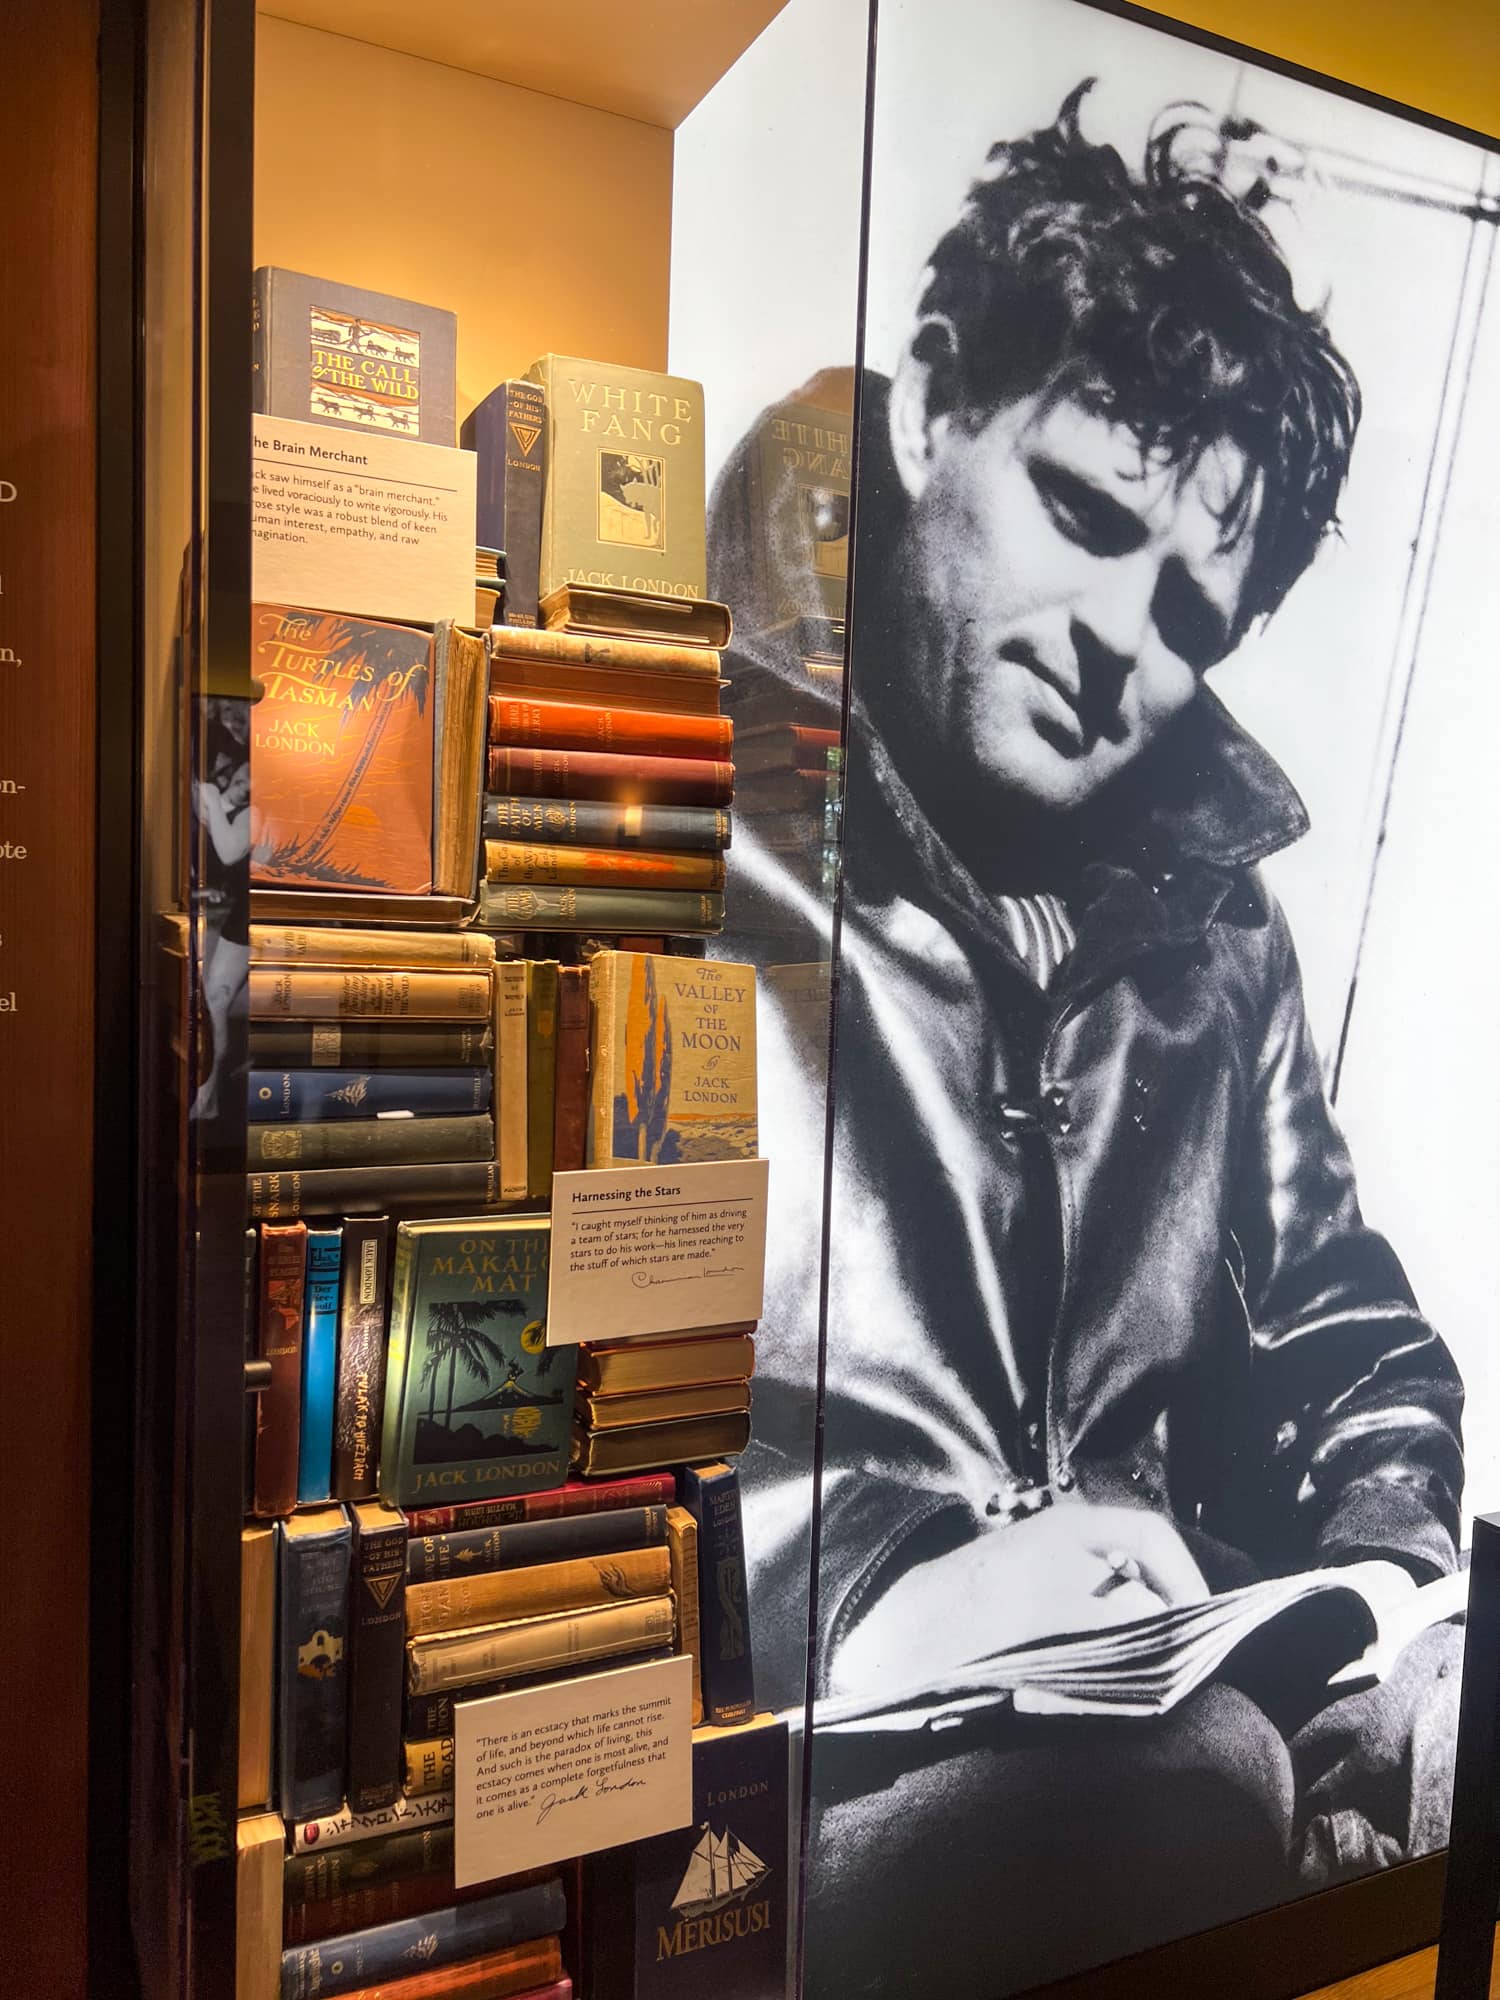 Books by Jack London